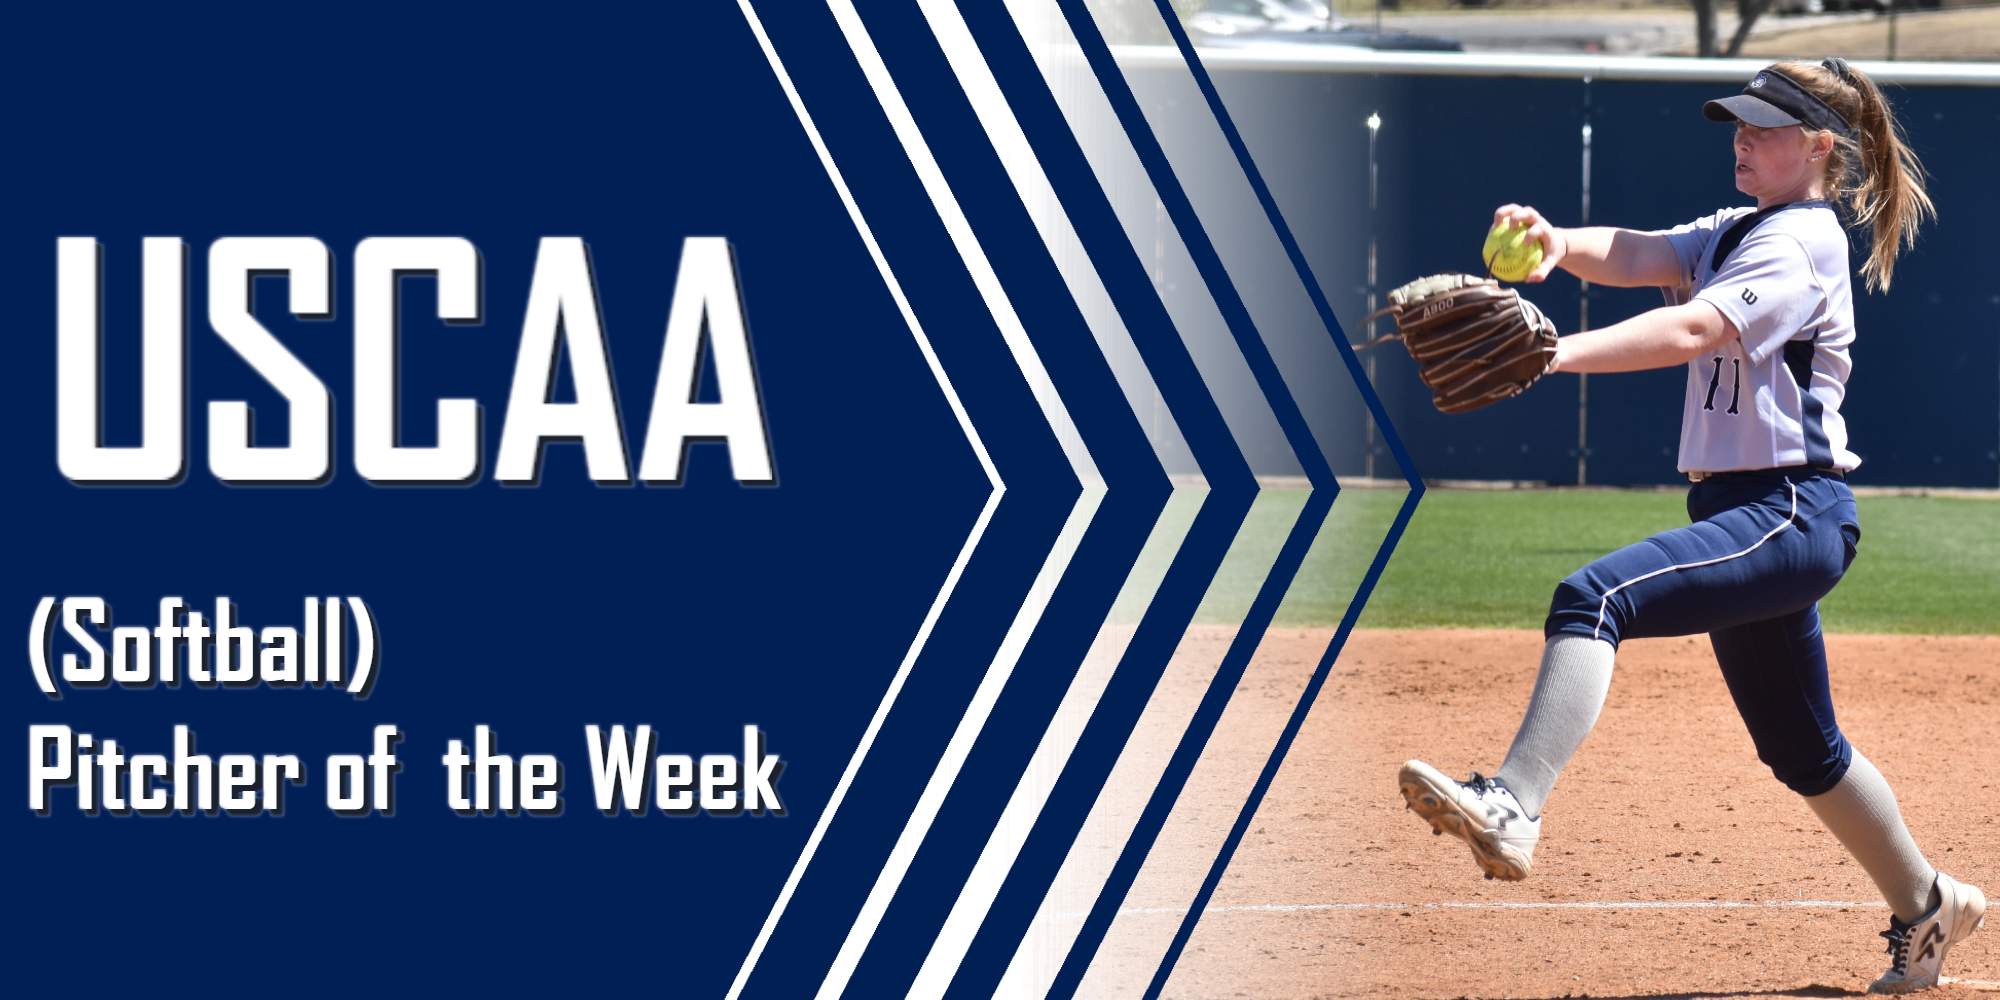 Rasmussen Adds USCAA Pitcher of the Week after Strong Tournament